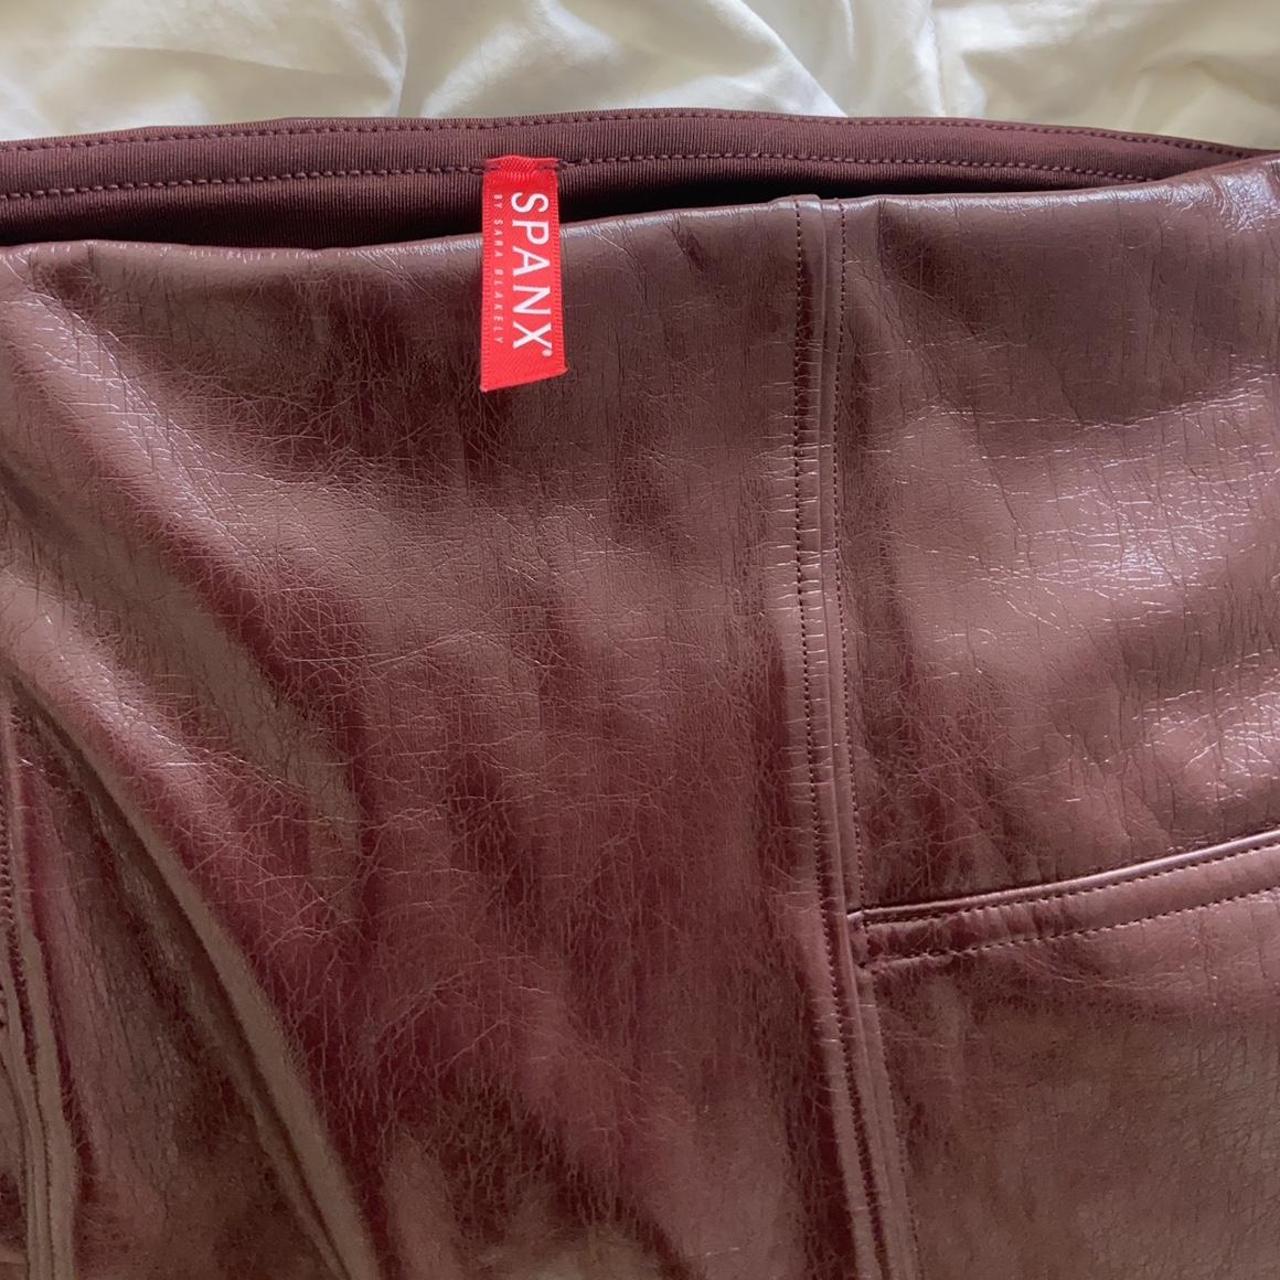 Spanx faux patent leather leggings in Ruby, size S. - Depop